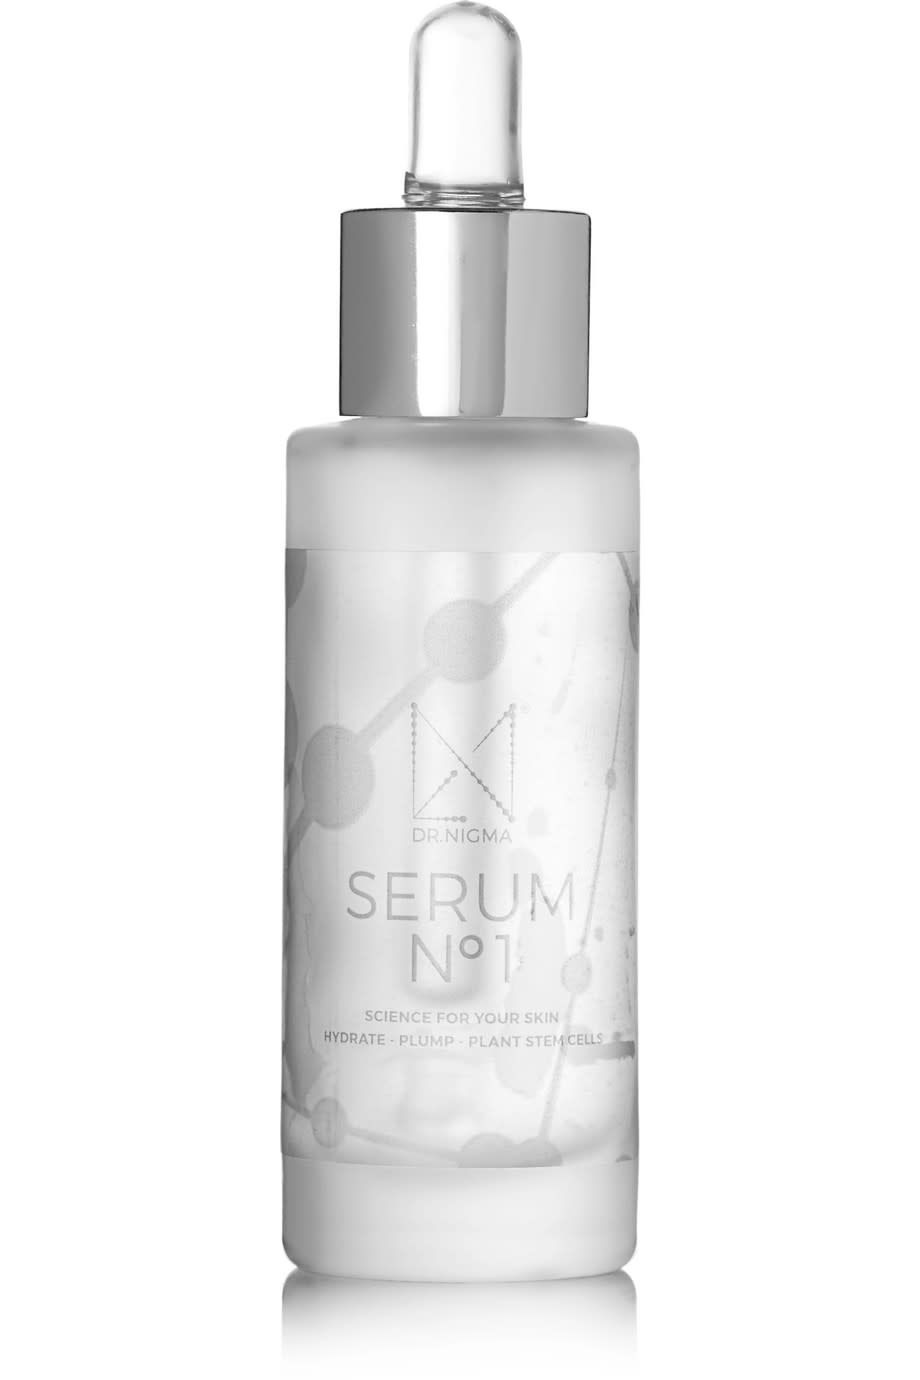 January Loves: Dr Nigma Talib Hydrating and Plumping Serum No1